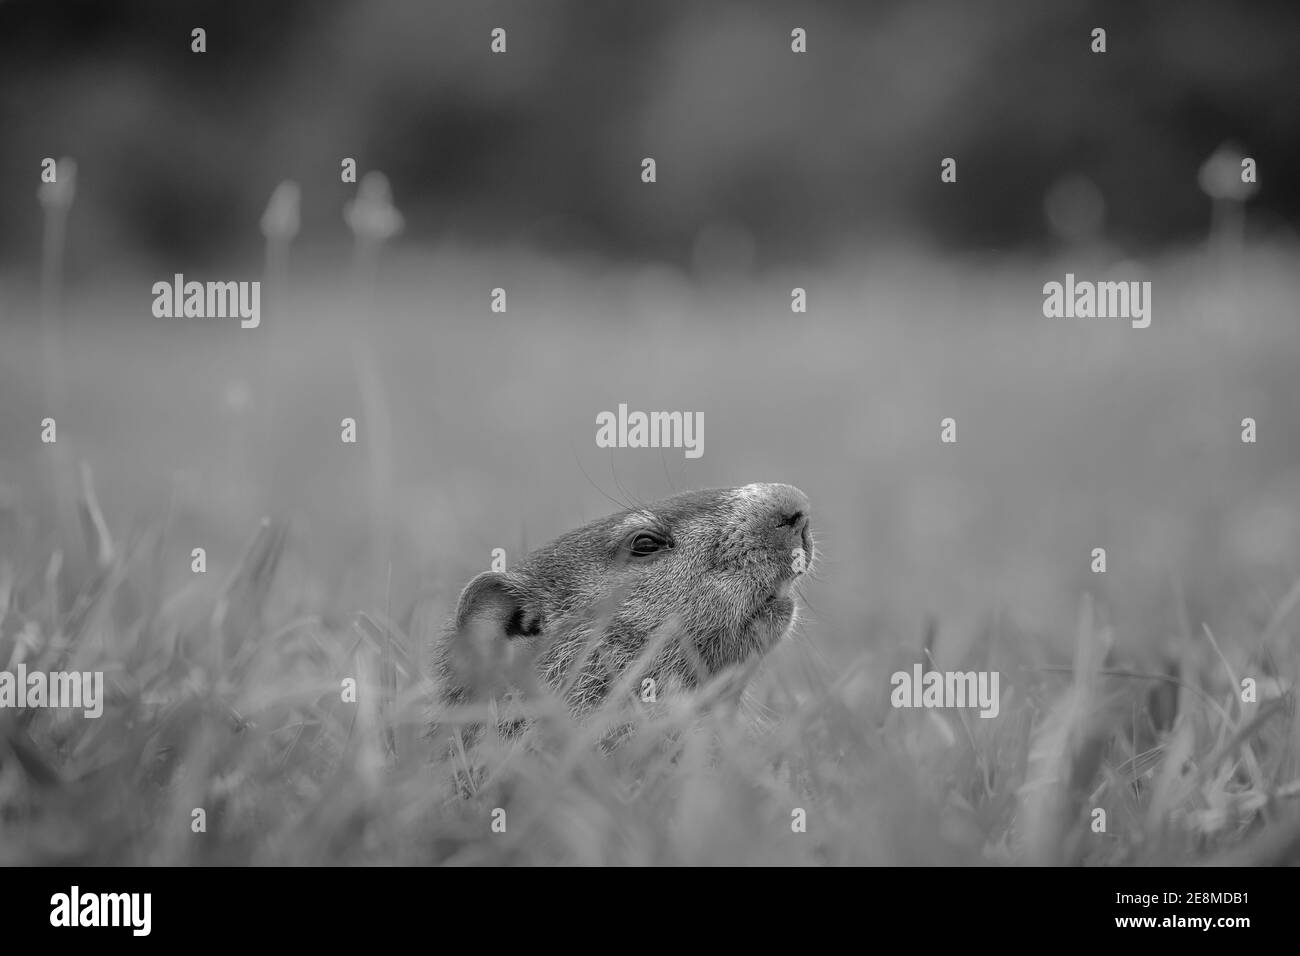 Black and white of a juvenile Groundhog (Marmota monax) cautiously peeking from its hole. Raleigh, North Carolina. Stock Photo